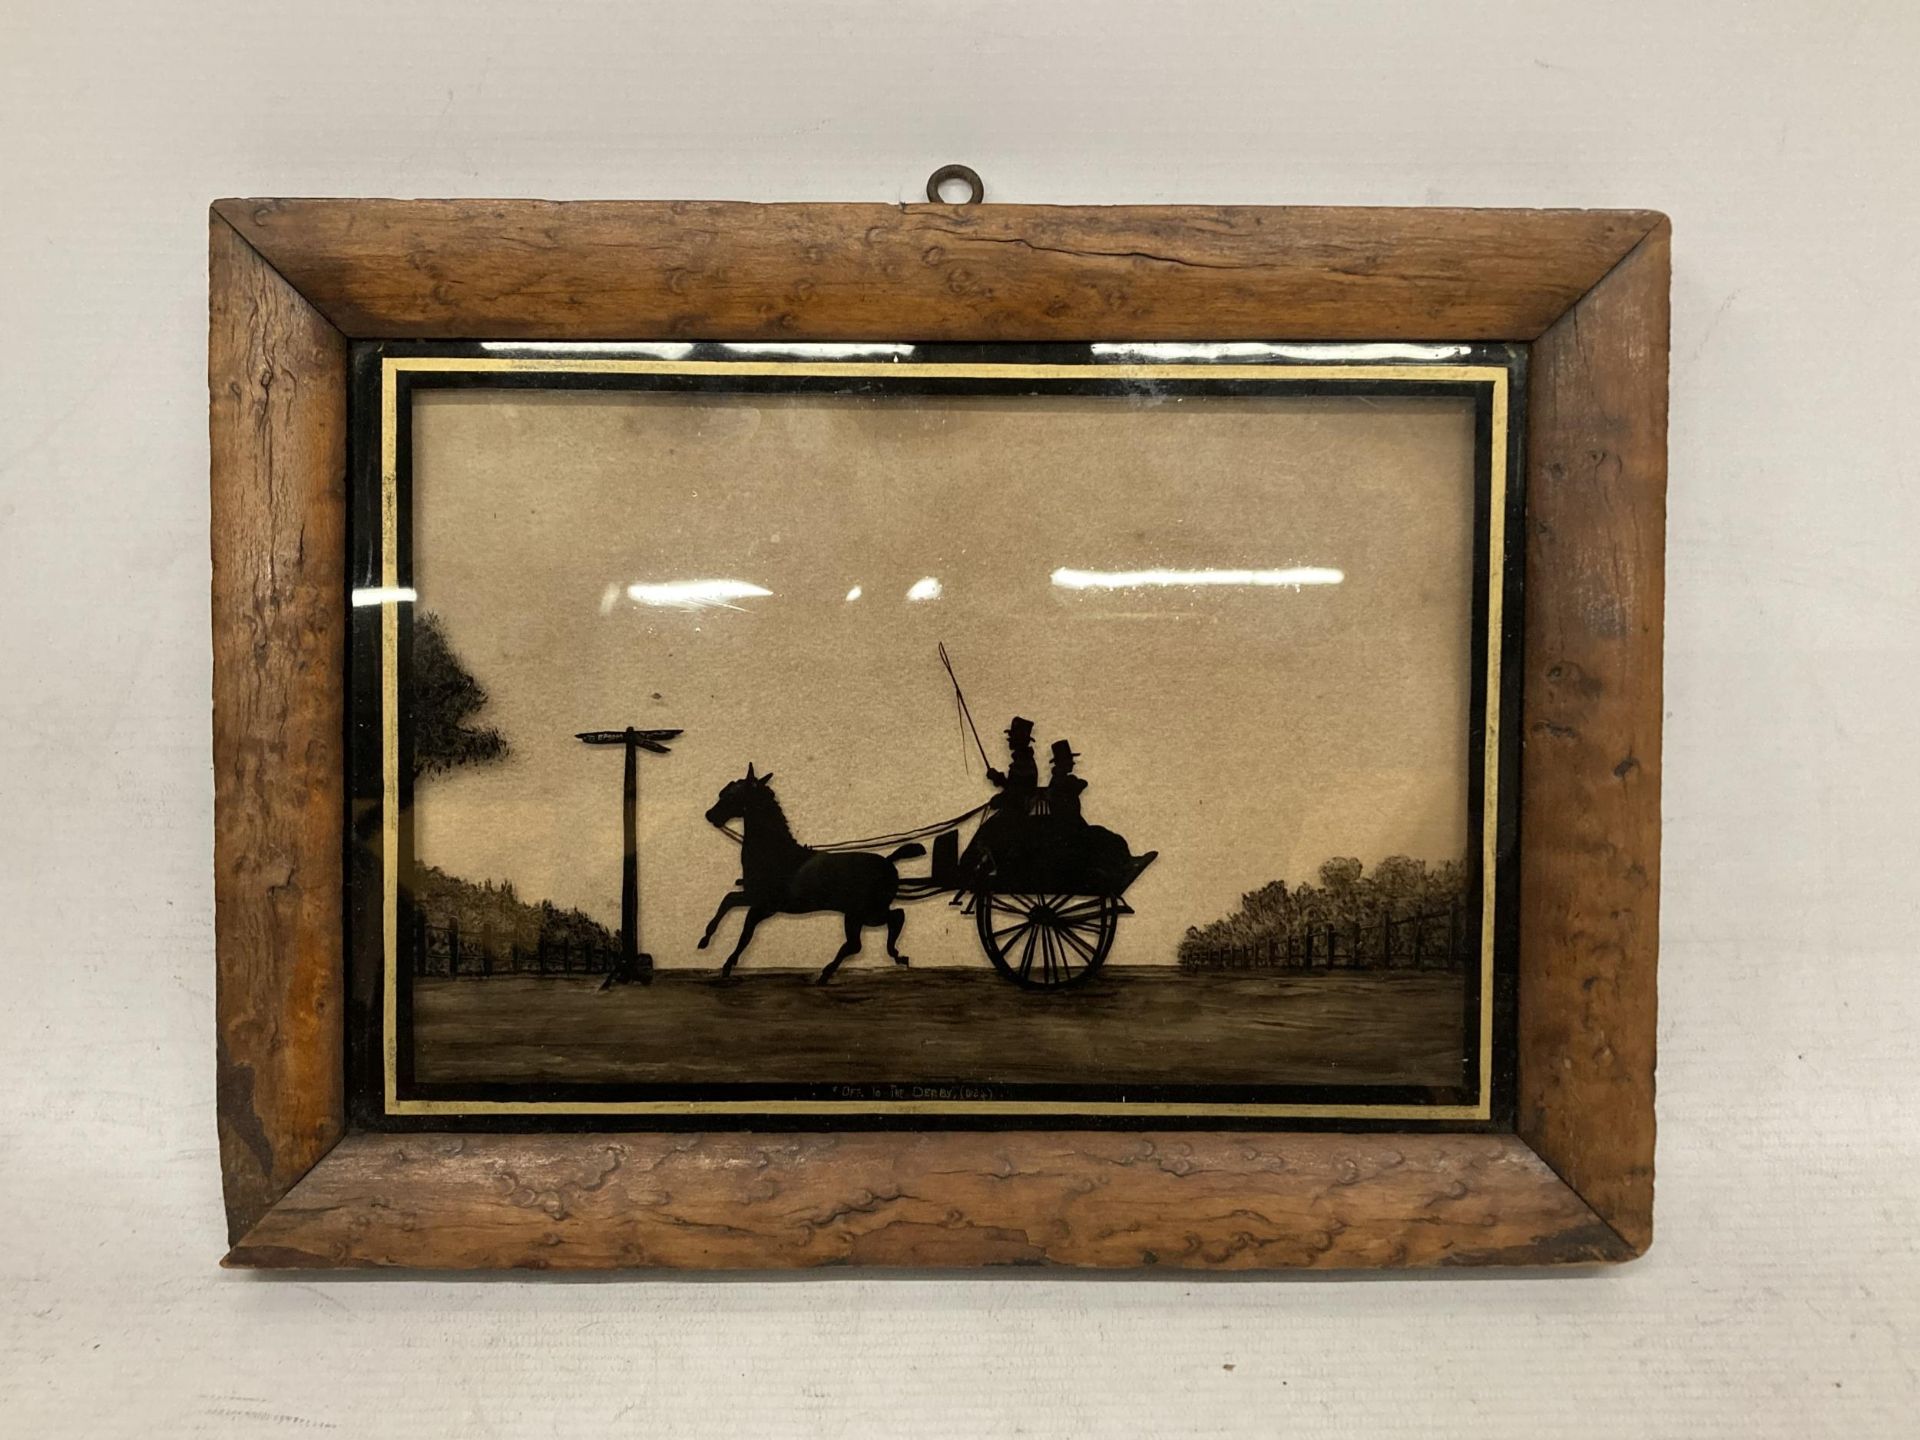 A FRAMED SILHOUETTE GLASS SLIDE TITLED 'OFF TO THE DERBY'